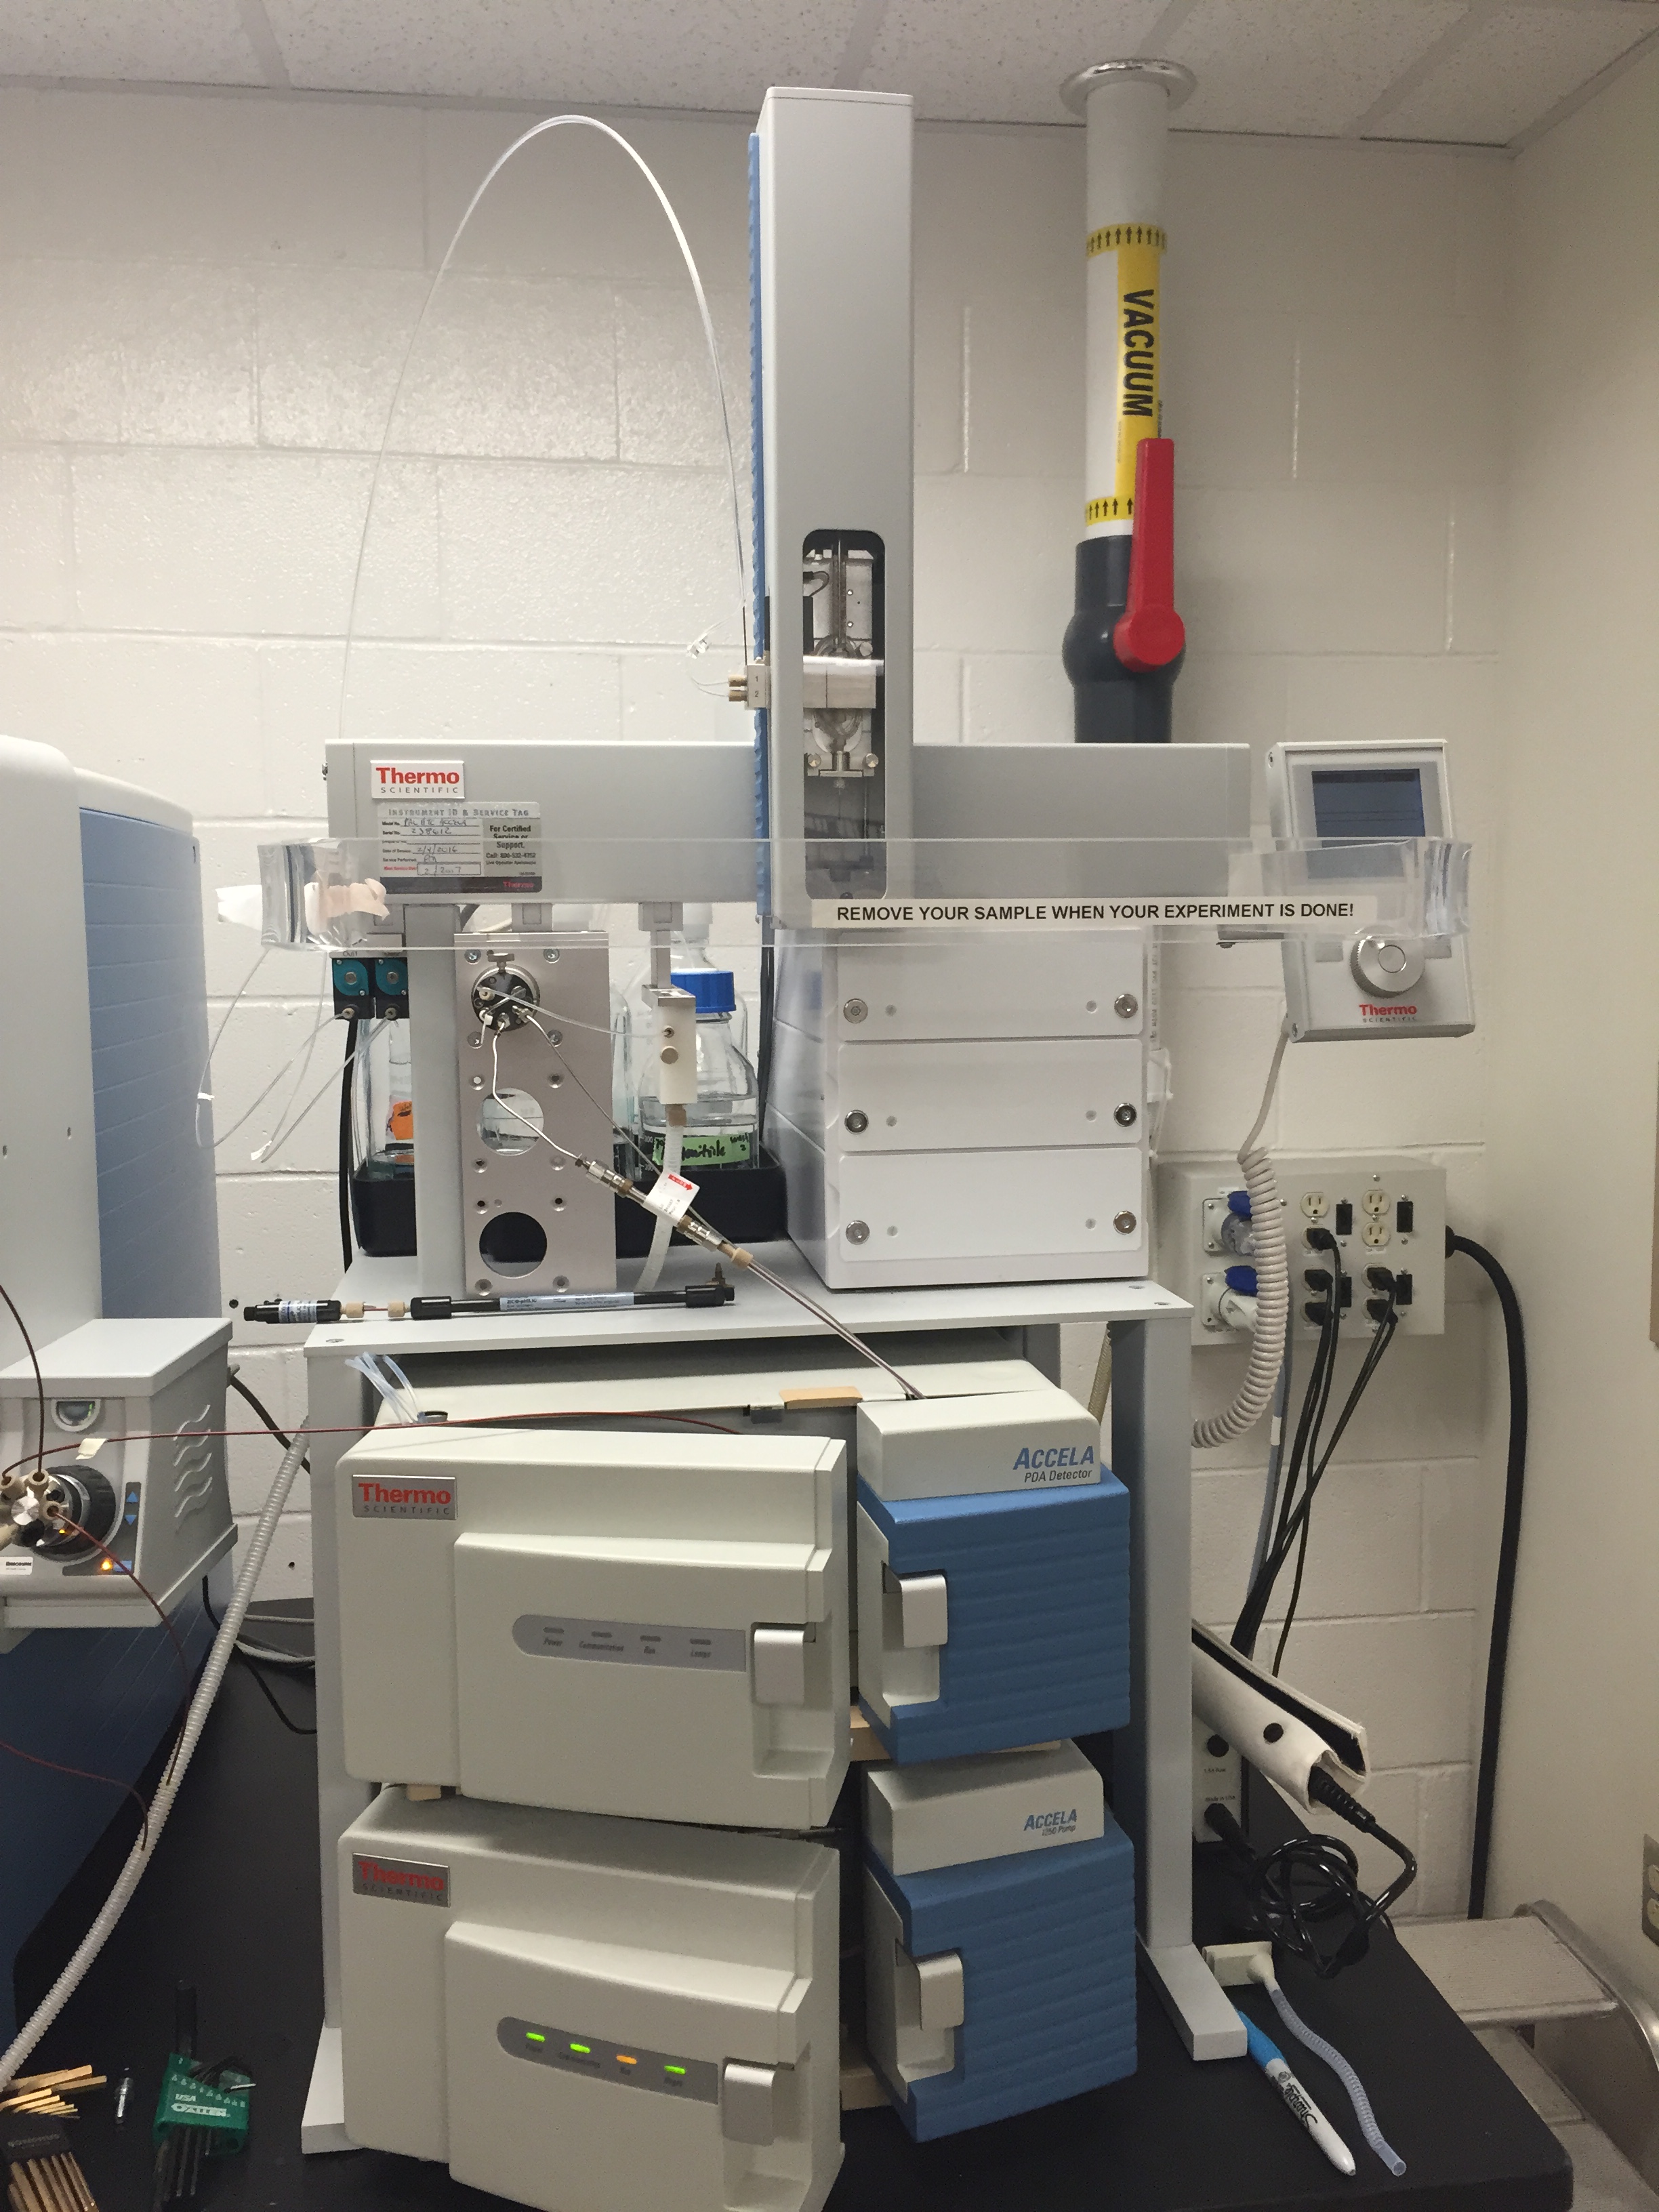 Thermofisher Scientific Accela Ultra High Performance Liquid Chromatography